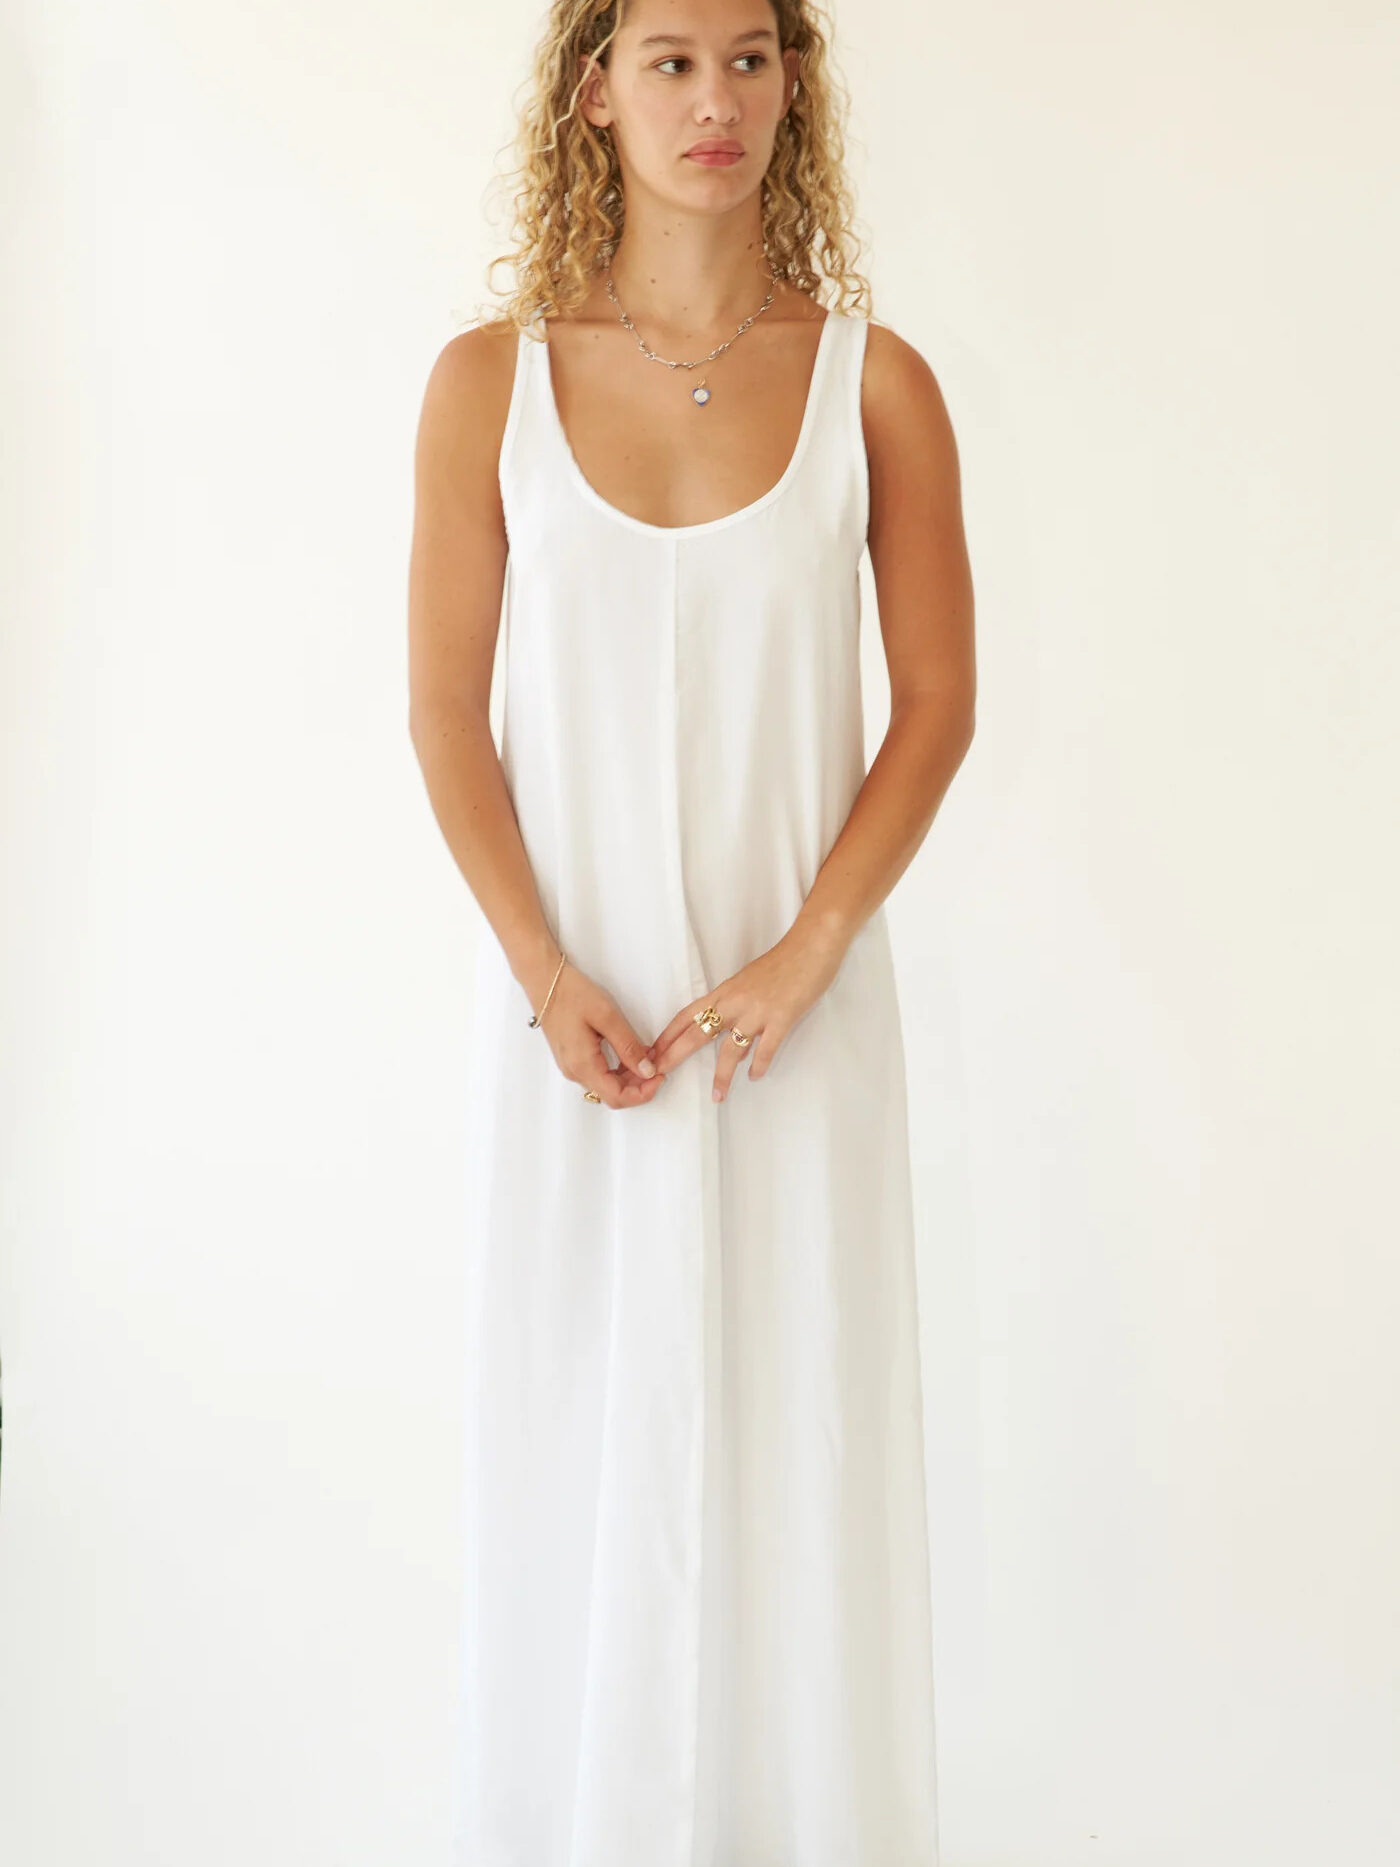 A young woman with curly hair, wearing a simple long white dress, stands against a white background, looking slightly to the side.